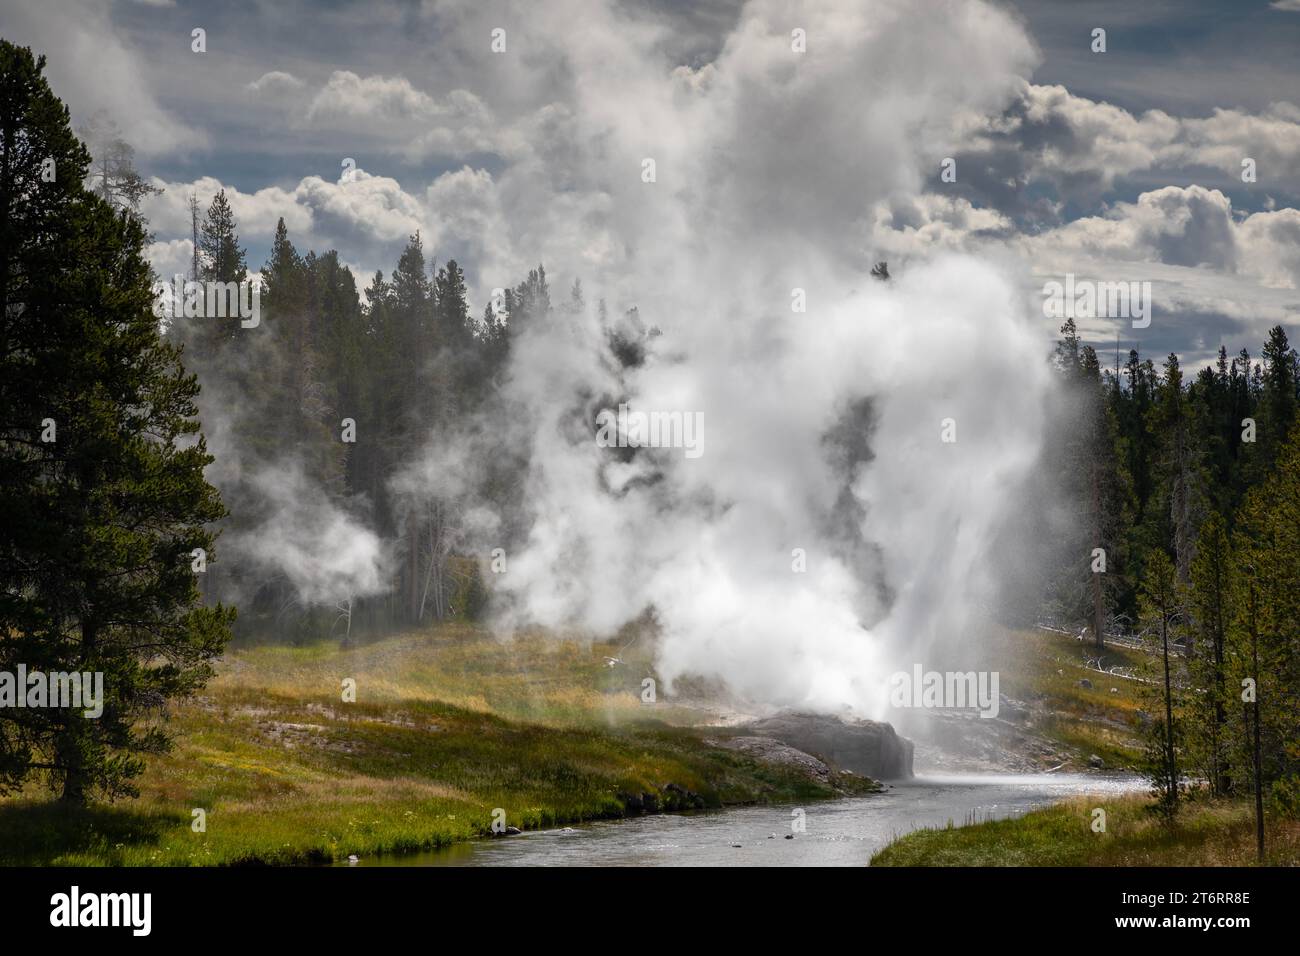 WY05790-00...WYOMING - Eruption of Riverside Geyser on the edge of the Firehole River in the Upper Geyser Basin of Yellowstone National Park. Stock Photo